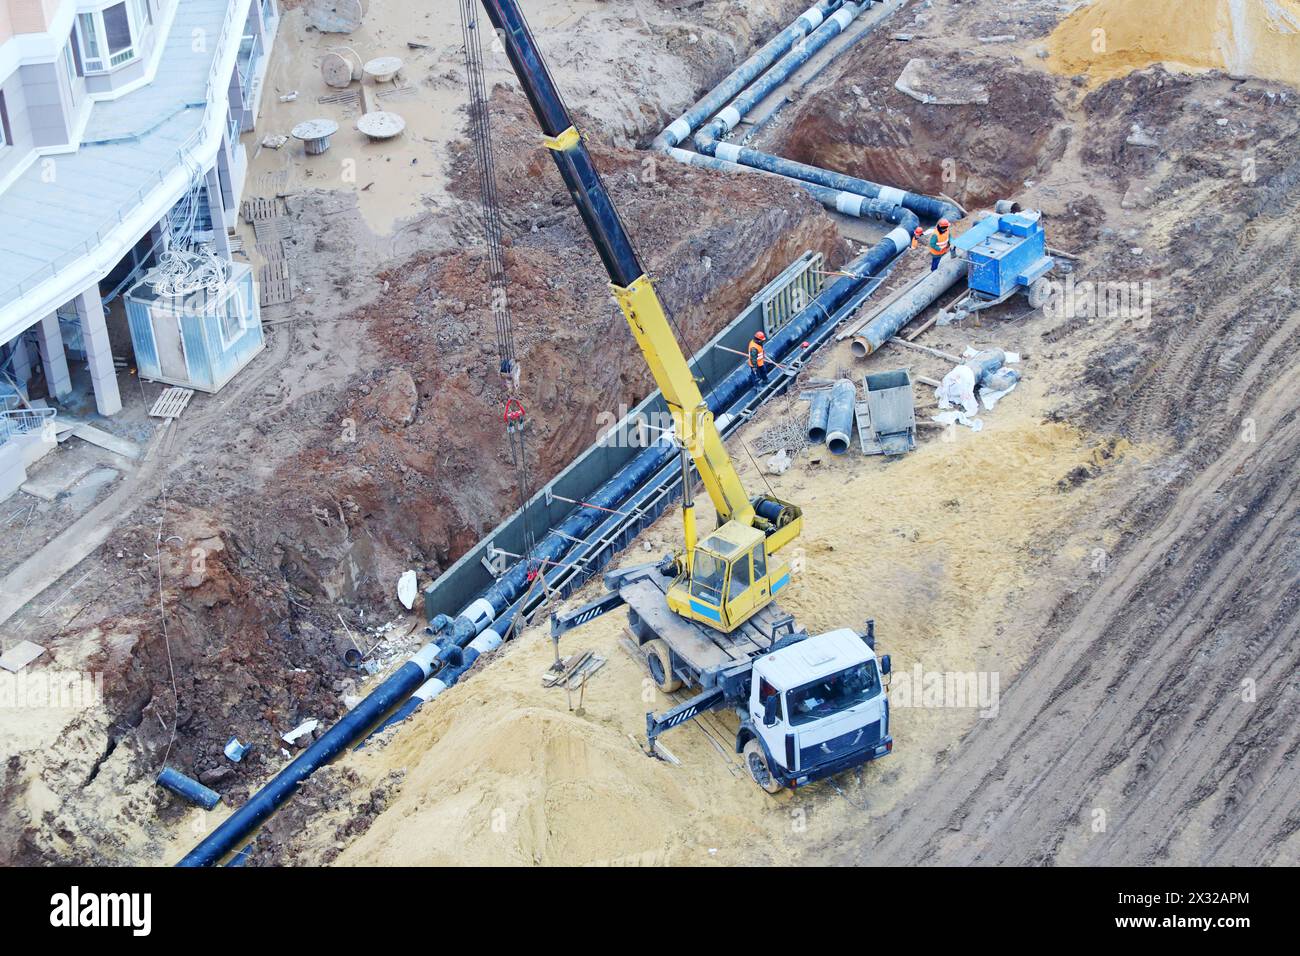 Truck Crane puts underground pipes at large construction site. Stock Photo